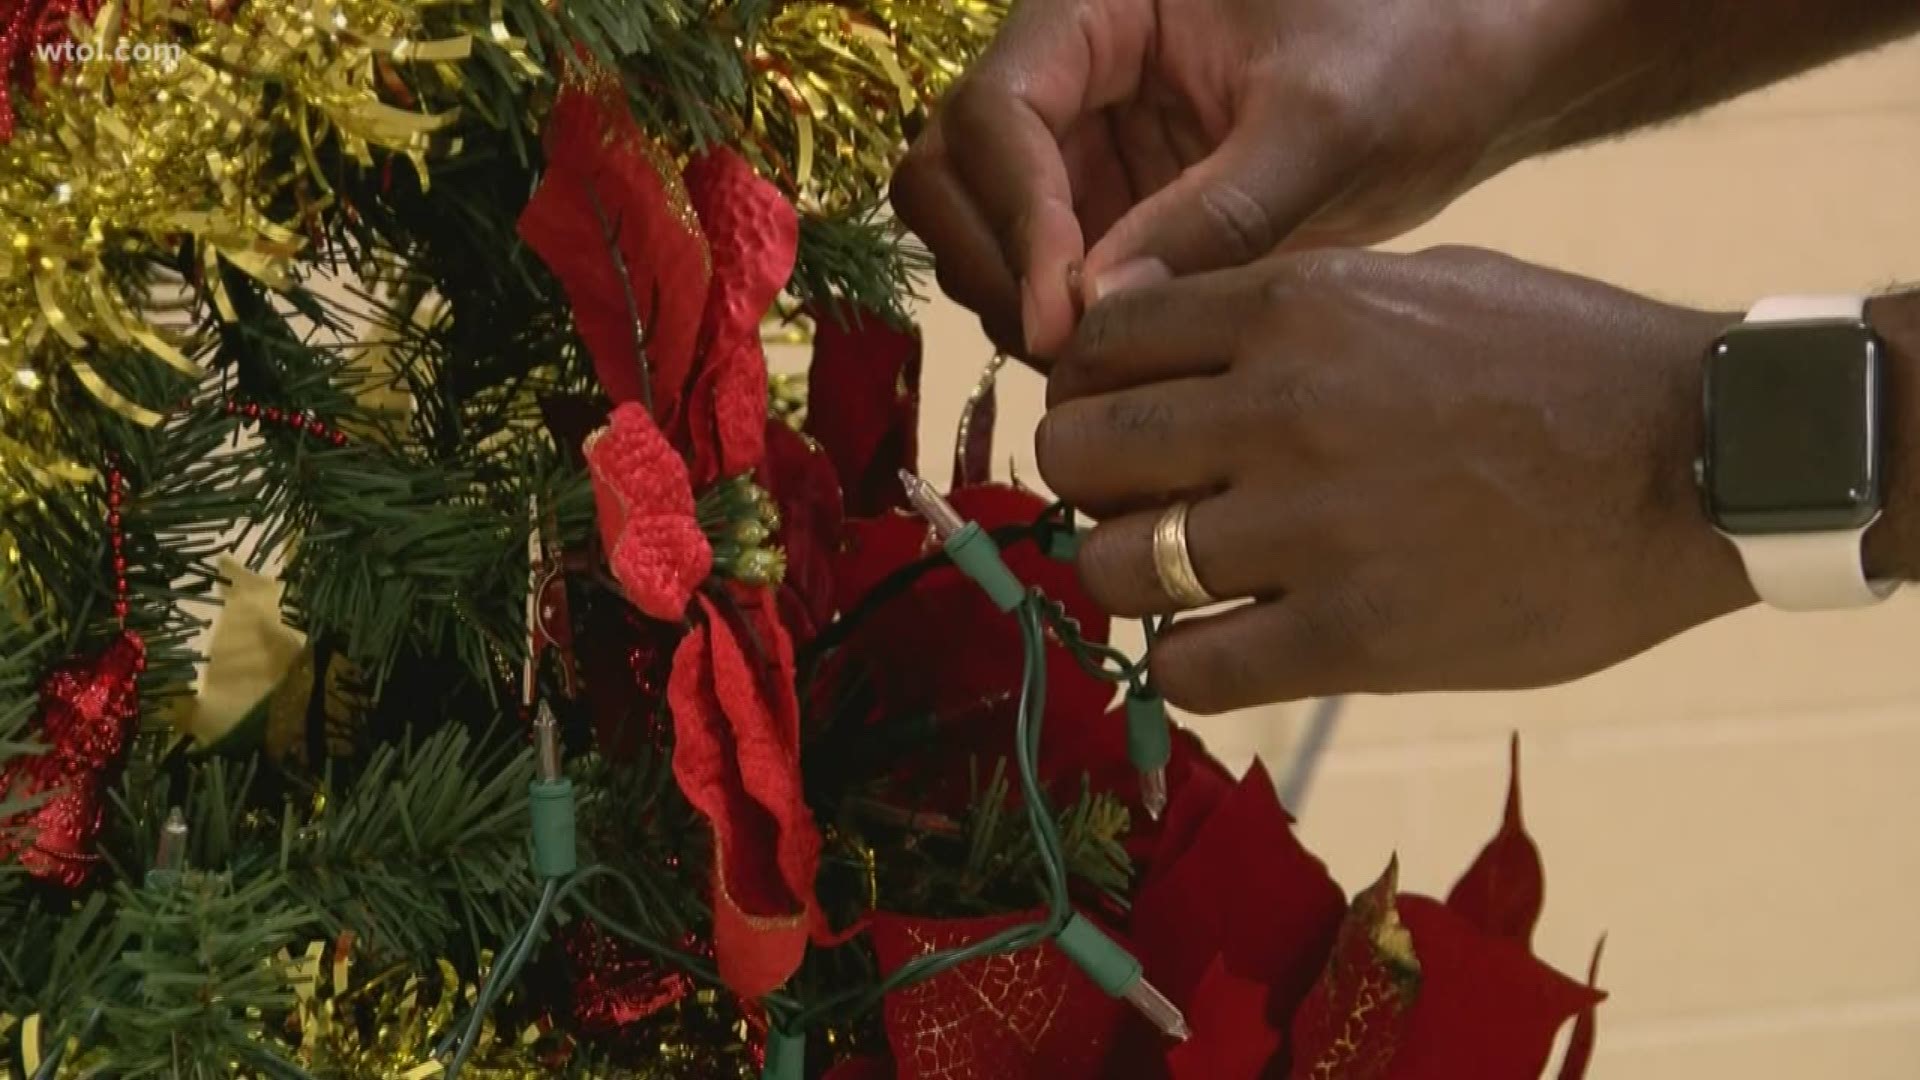 It's important to take the proper steps to stay safe, as holiday decorations can often bring the risk of fires.